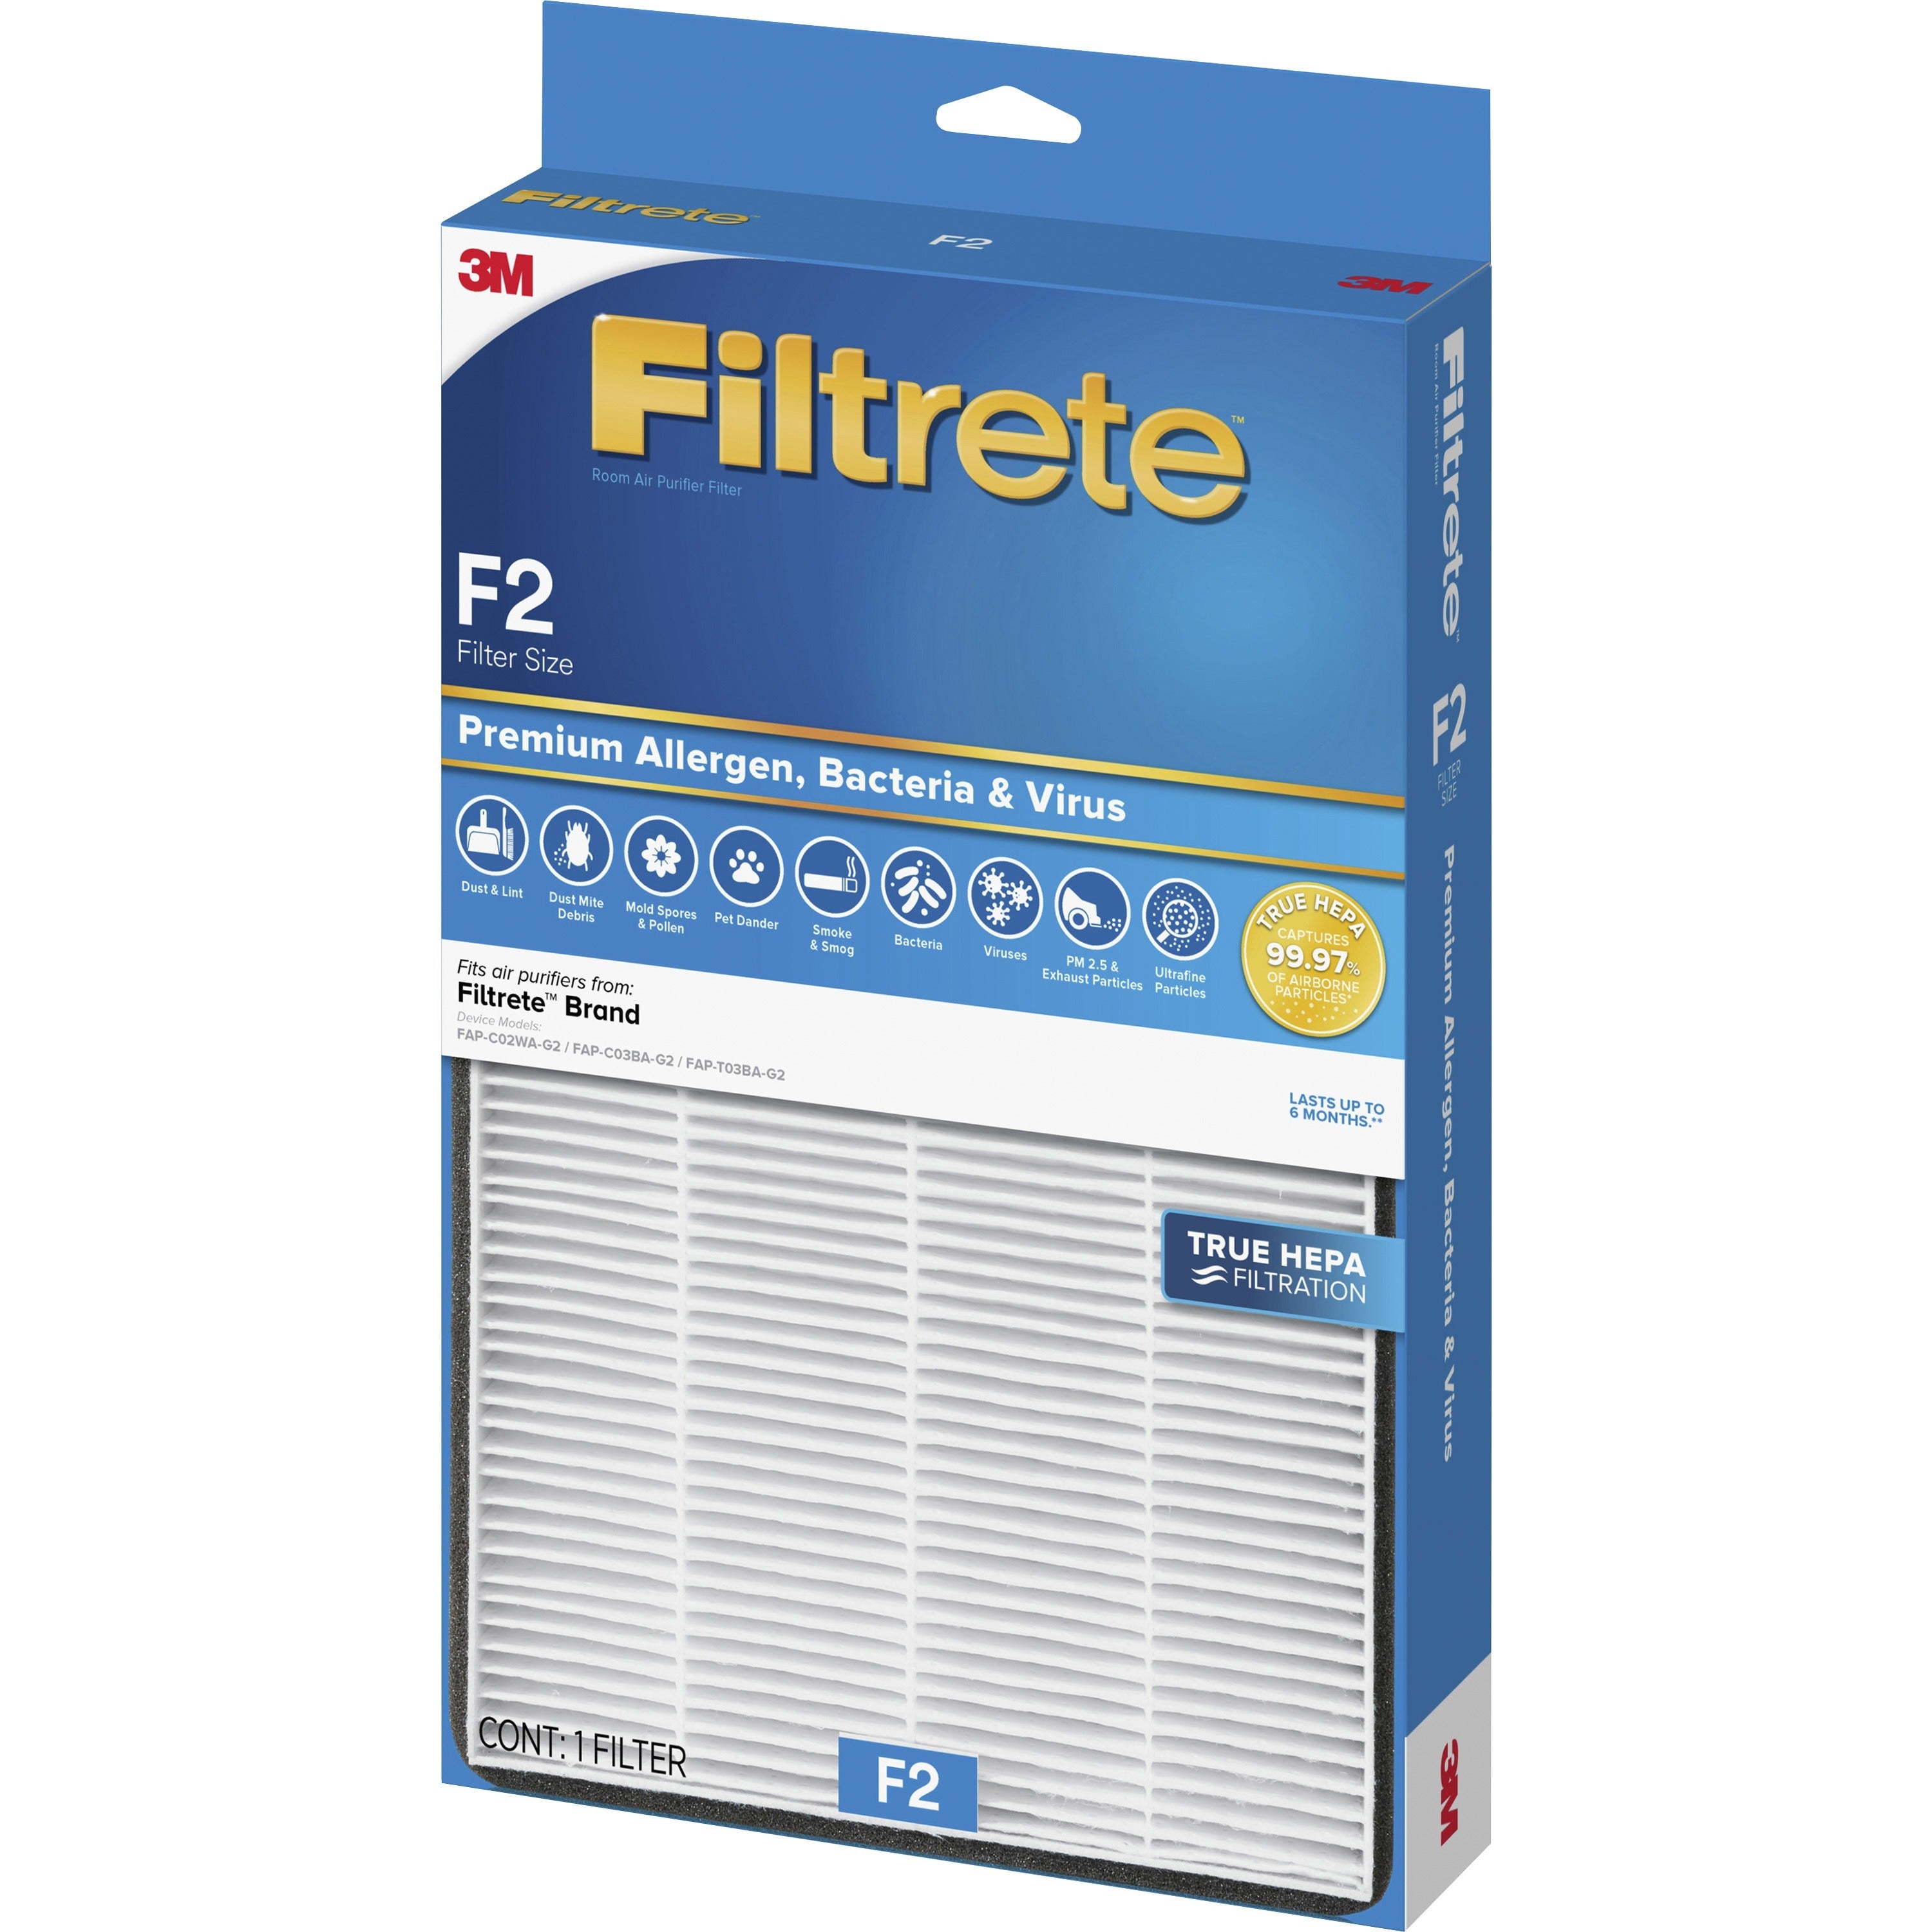 filtrete-air-filter-hepa-for-air-purifier-remove-allergens-remove-bacteria-remove-virus-particlesf2-filter-grade-82-height-x-13-width-polypropylene_mmmfapff2n4 - 3